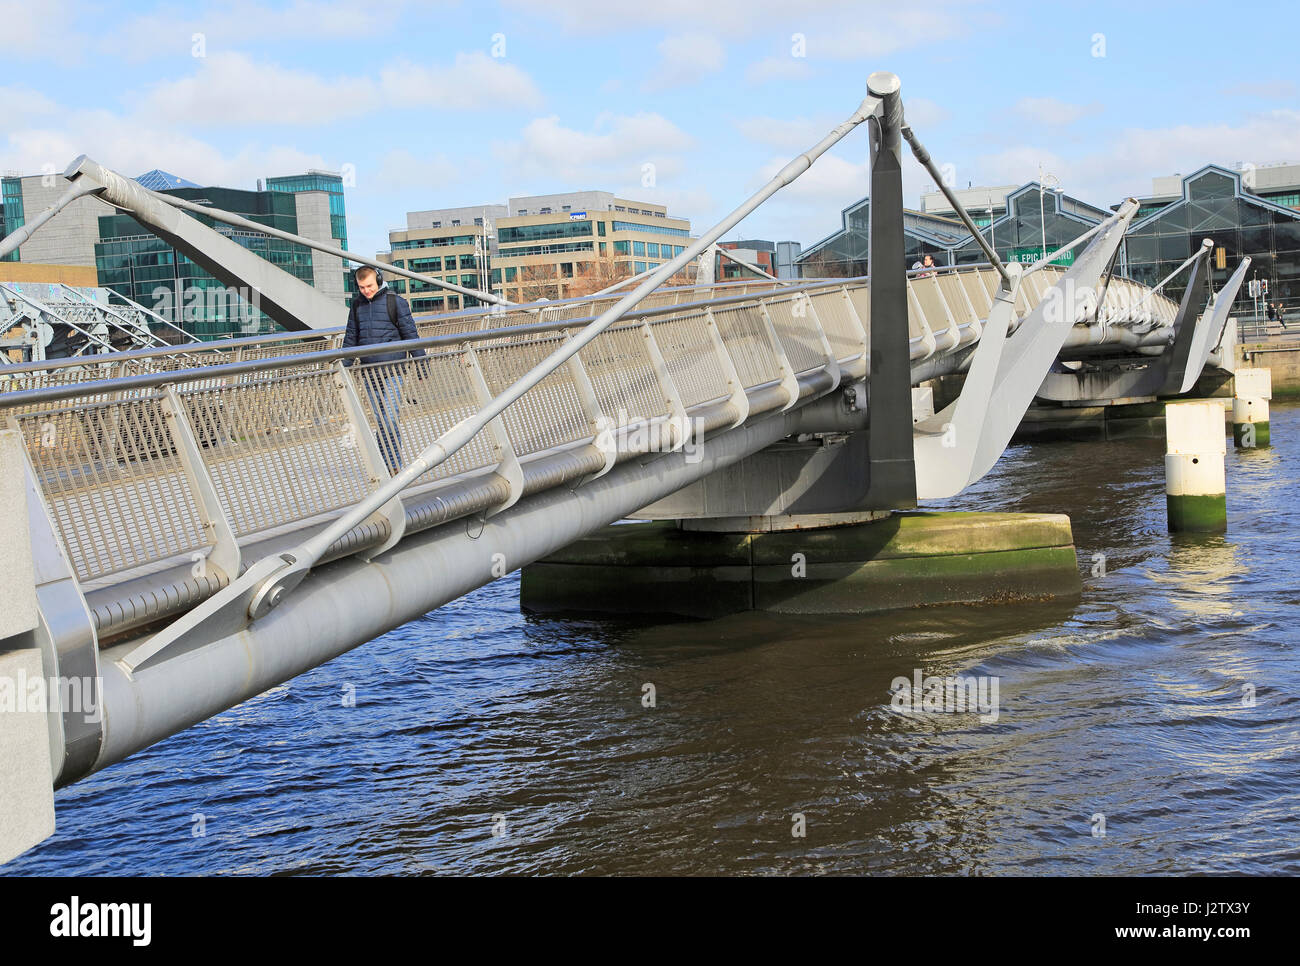 Sean O'Casey bridge crossing River Liffey, Dublin Docklands, l'Irlande, l'architecte Cyril O'Neill et O'Connor Sutton Cronin Consulting Engineers 2005 Banque D'Images